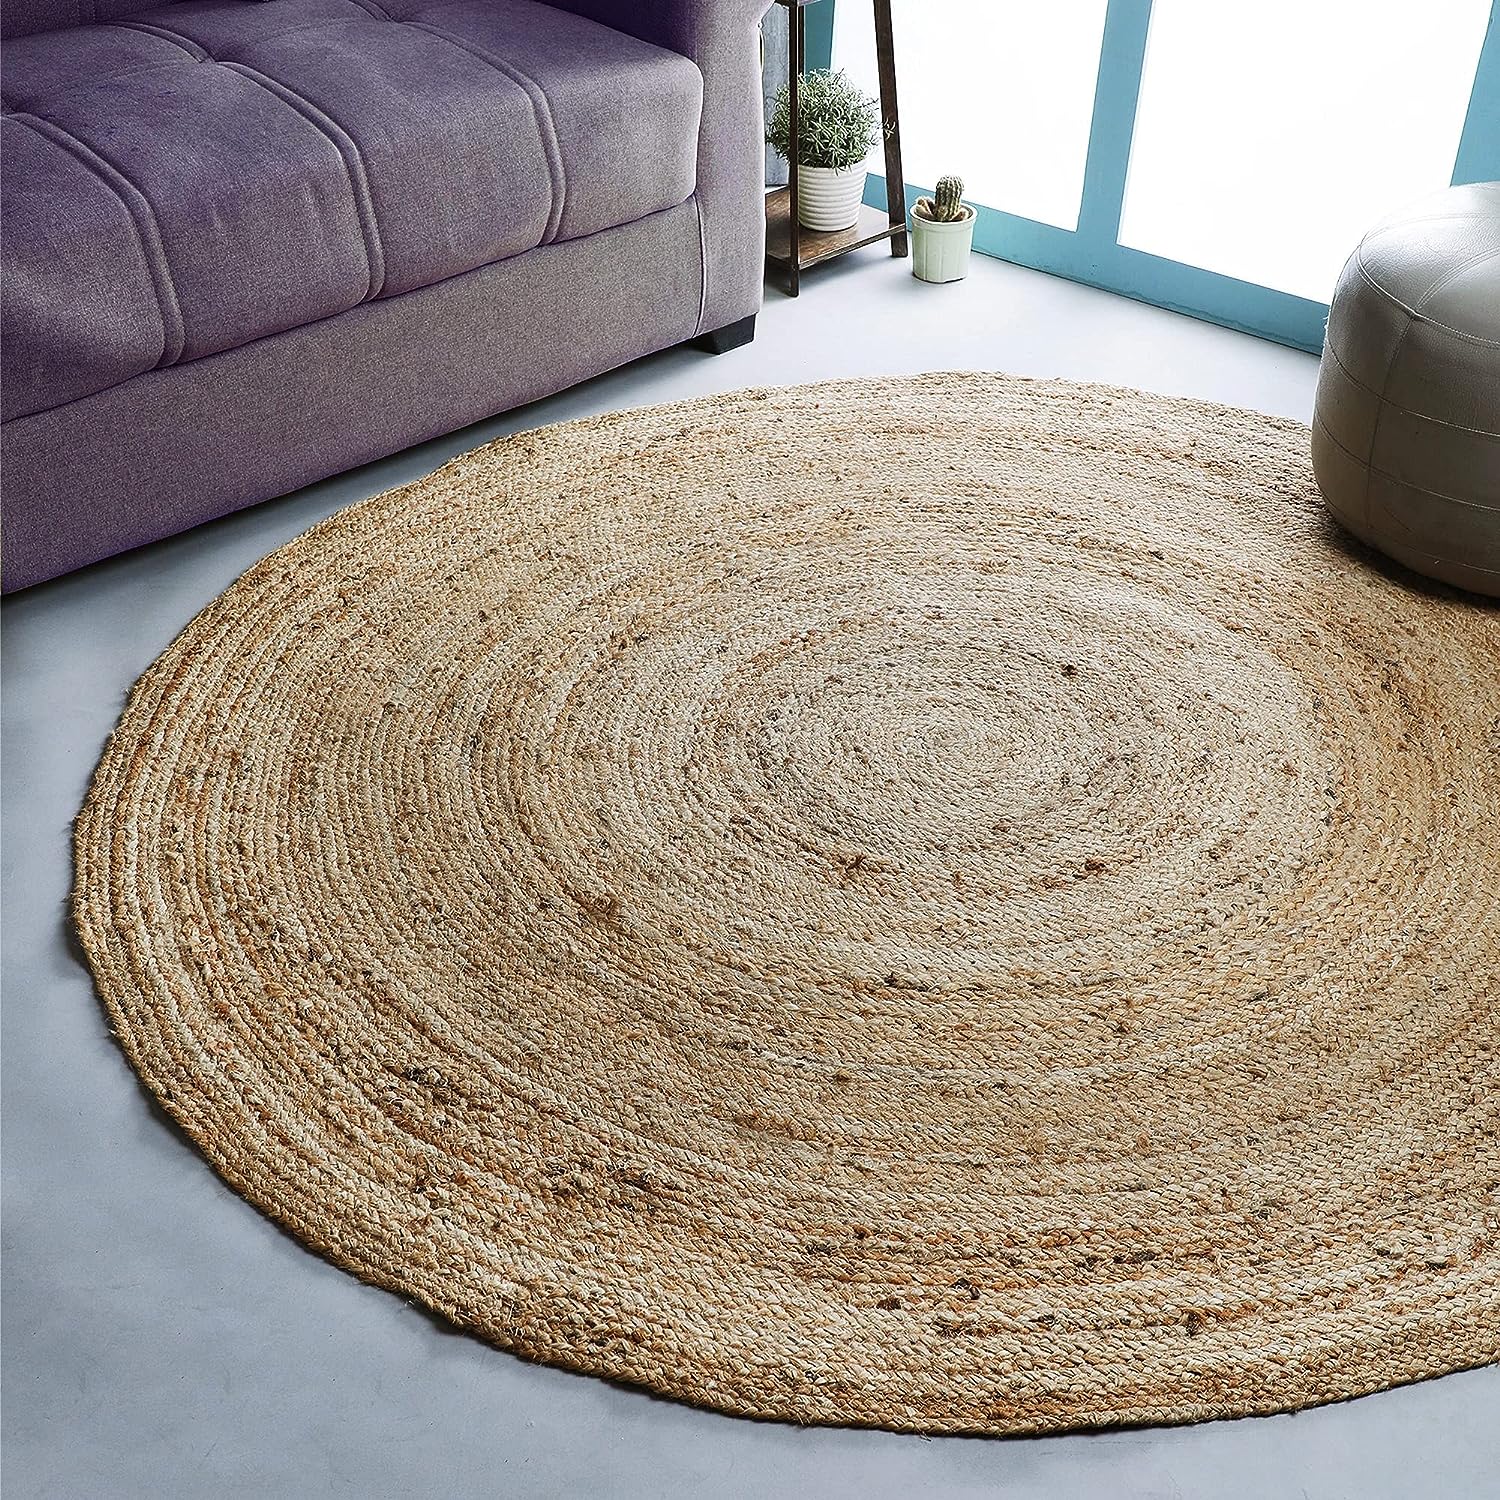 natural rug in living room round